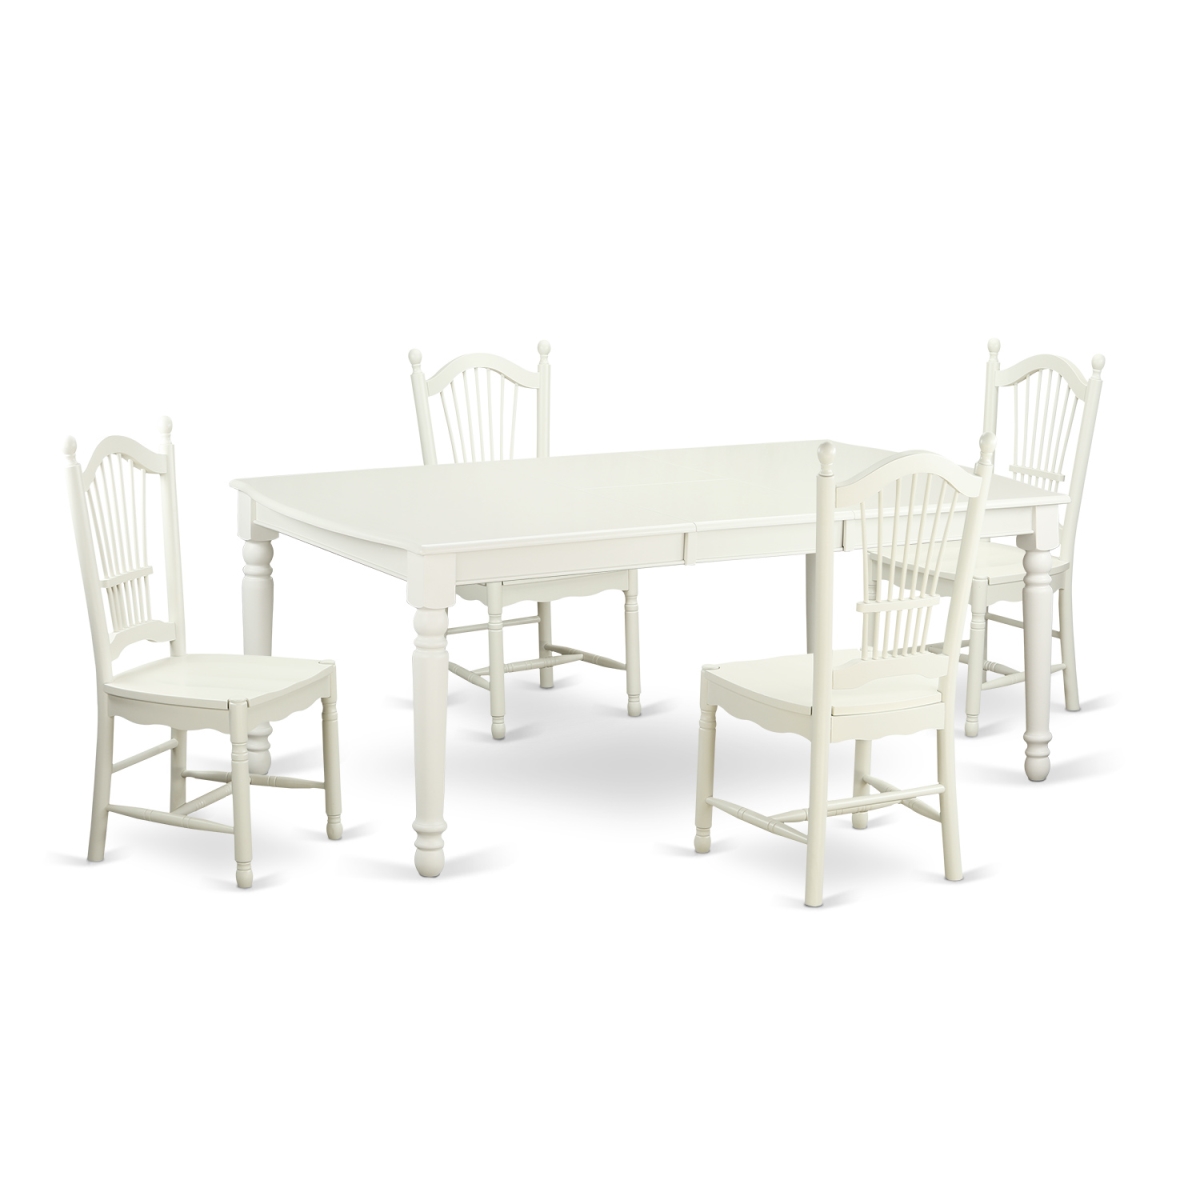 Dove5-lwh-w Dinette Table Set - Kitchen Table & 4 Chairs, Linen White - 5 Piece